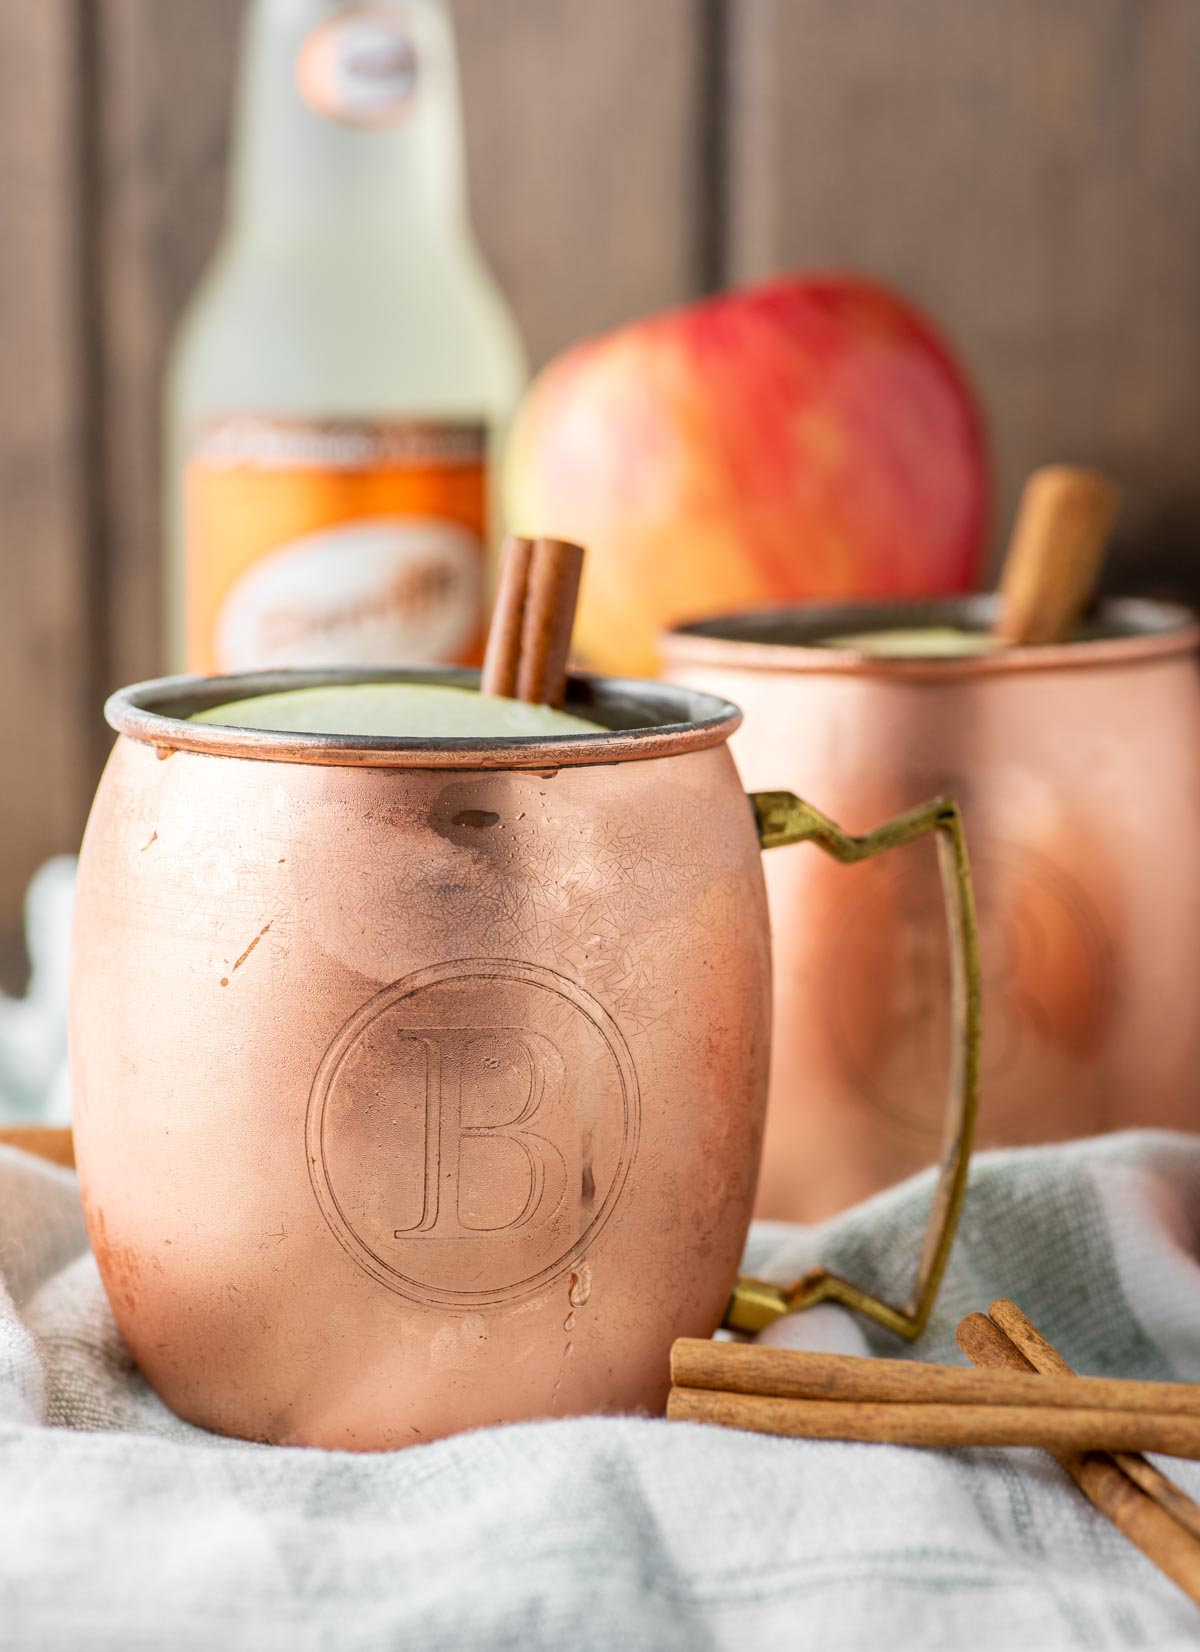 two apple cider moscow mules in copper cups